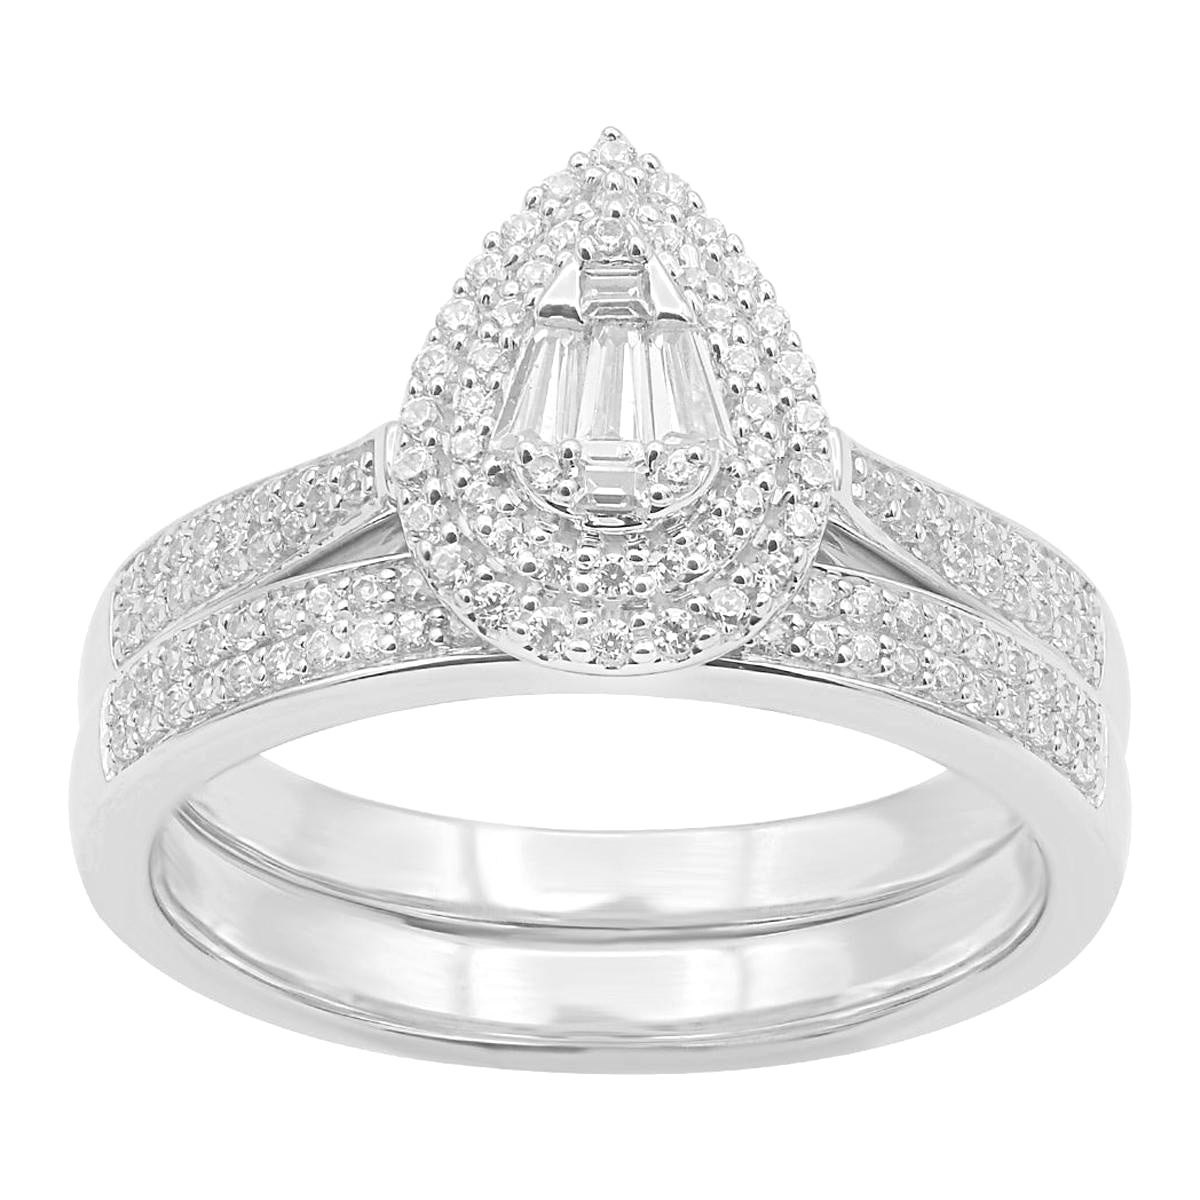 TJD 0.50 Carat Round and Baguette Diamond 14K White Gold Pear Shaped Bridal Set For Sale